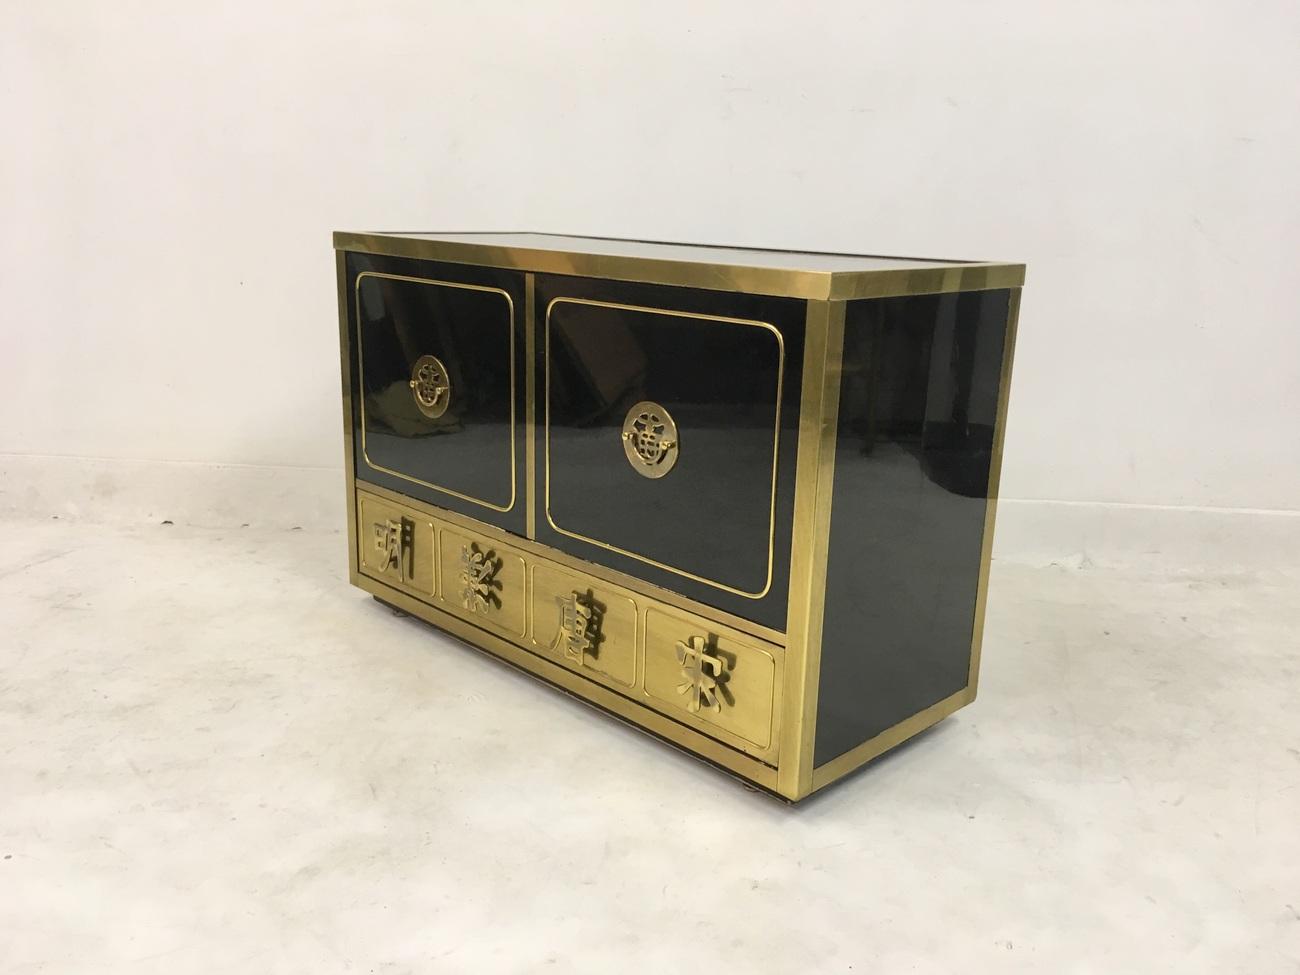 Vintage 1970s Black Lacquer and Brass Cabinet by Mastercraft 5